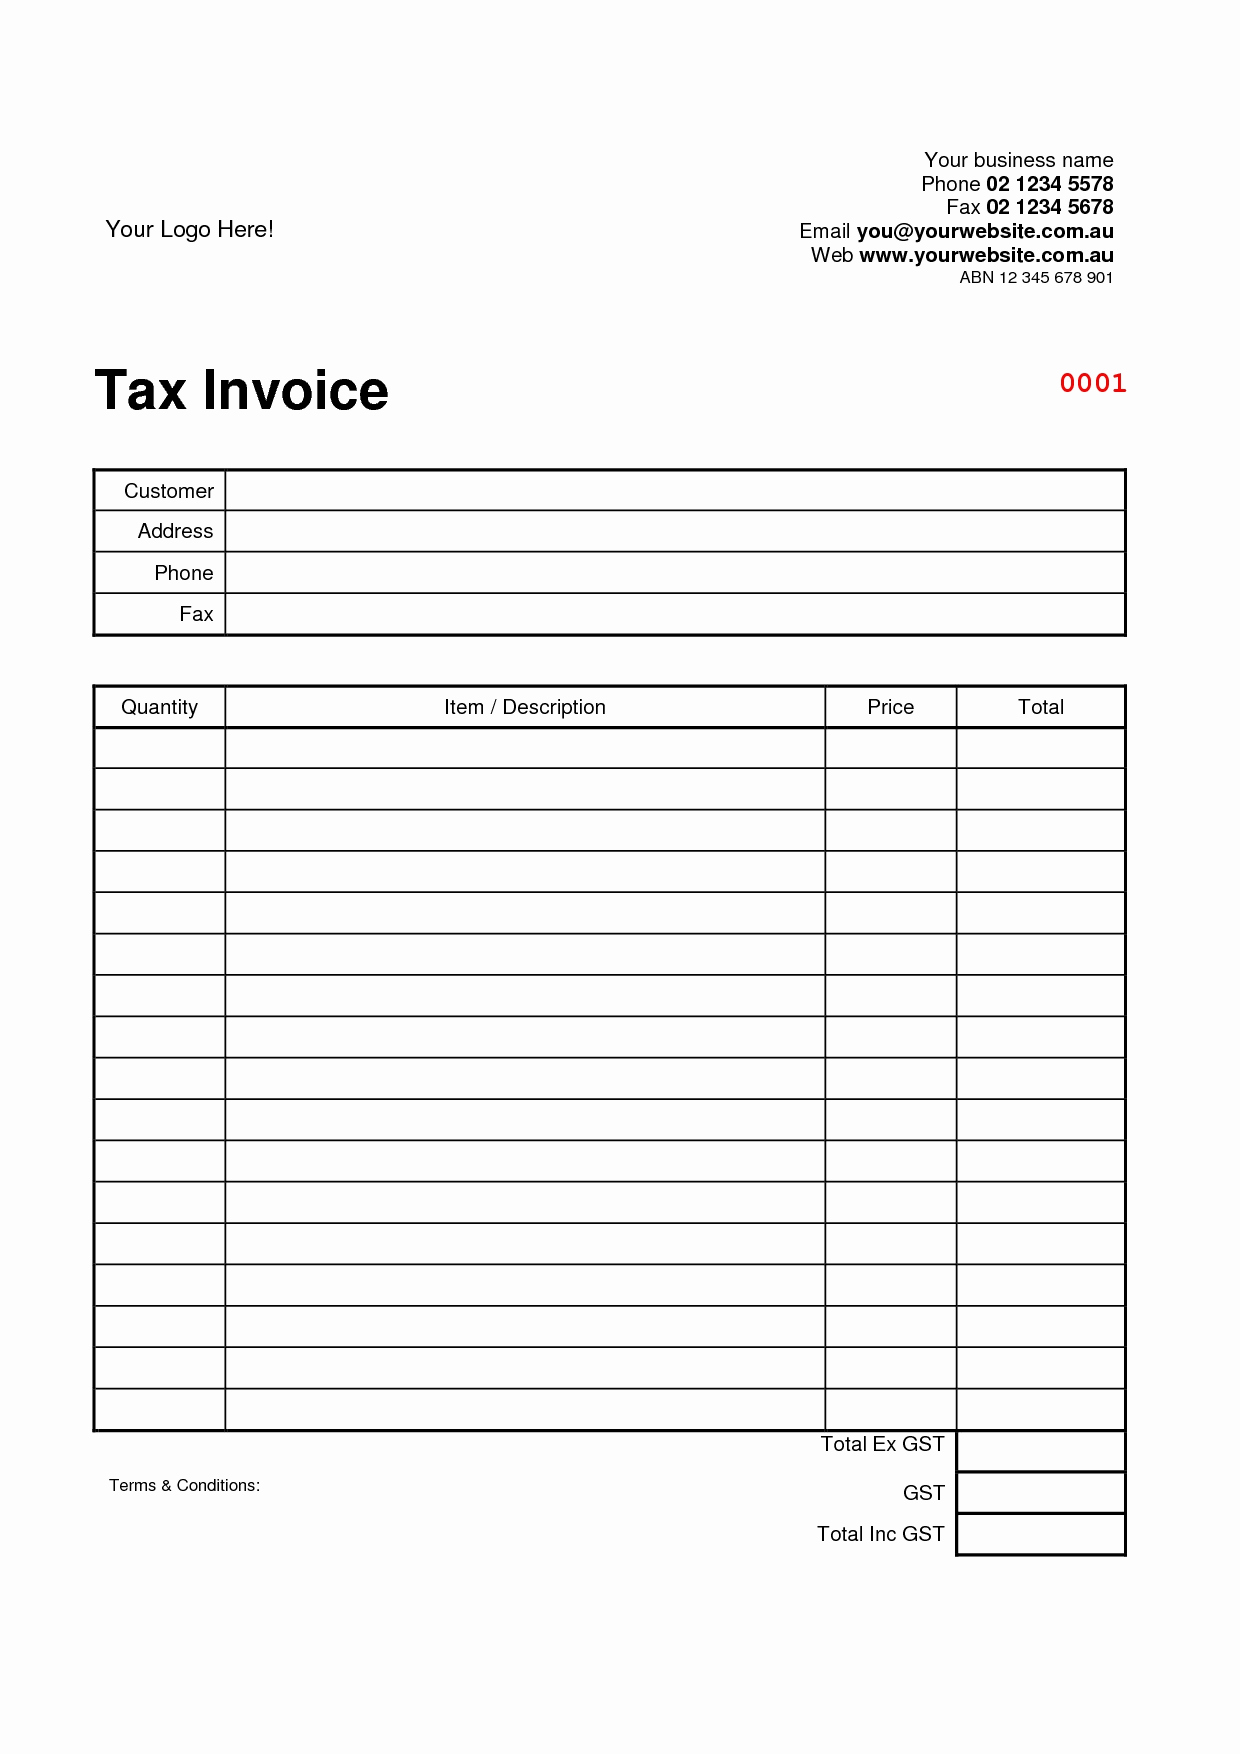 Word Document Invoice Template Unique Tax Invoice Template Word Doc